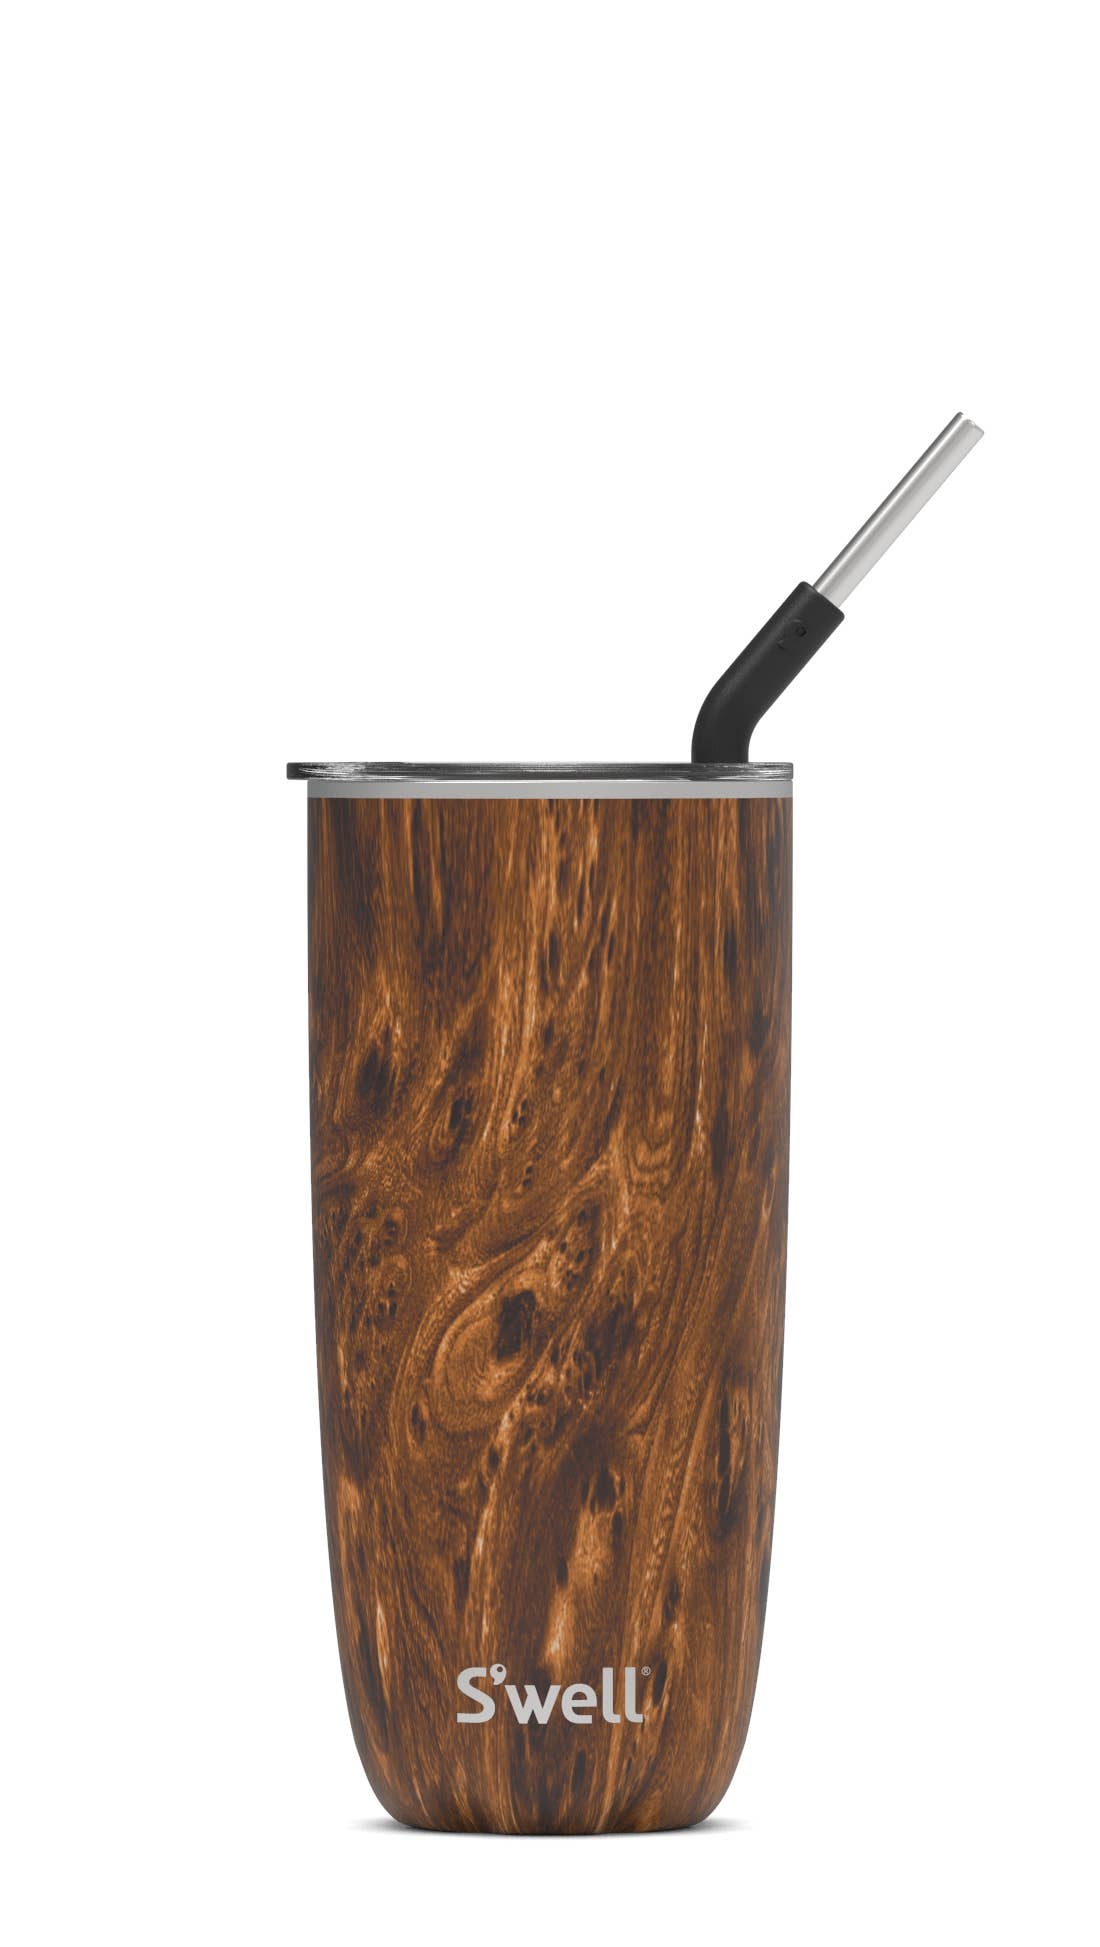 S'well - 24oz. Stainless Steel Teakwood Tumbler with Straw